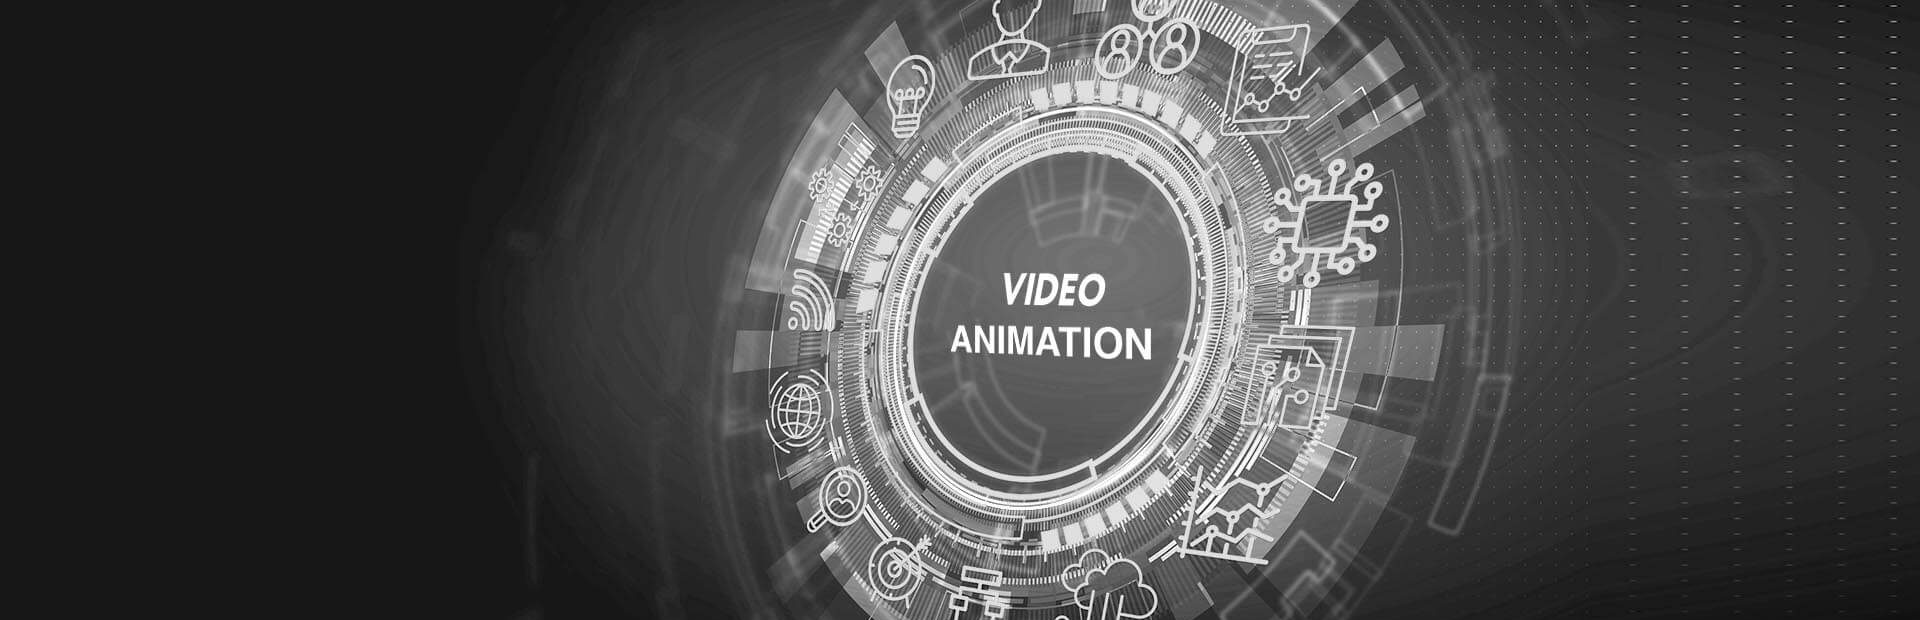 Hologram with video animation services and related icons.